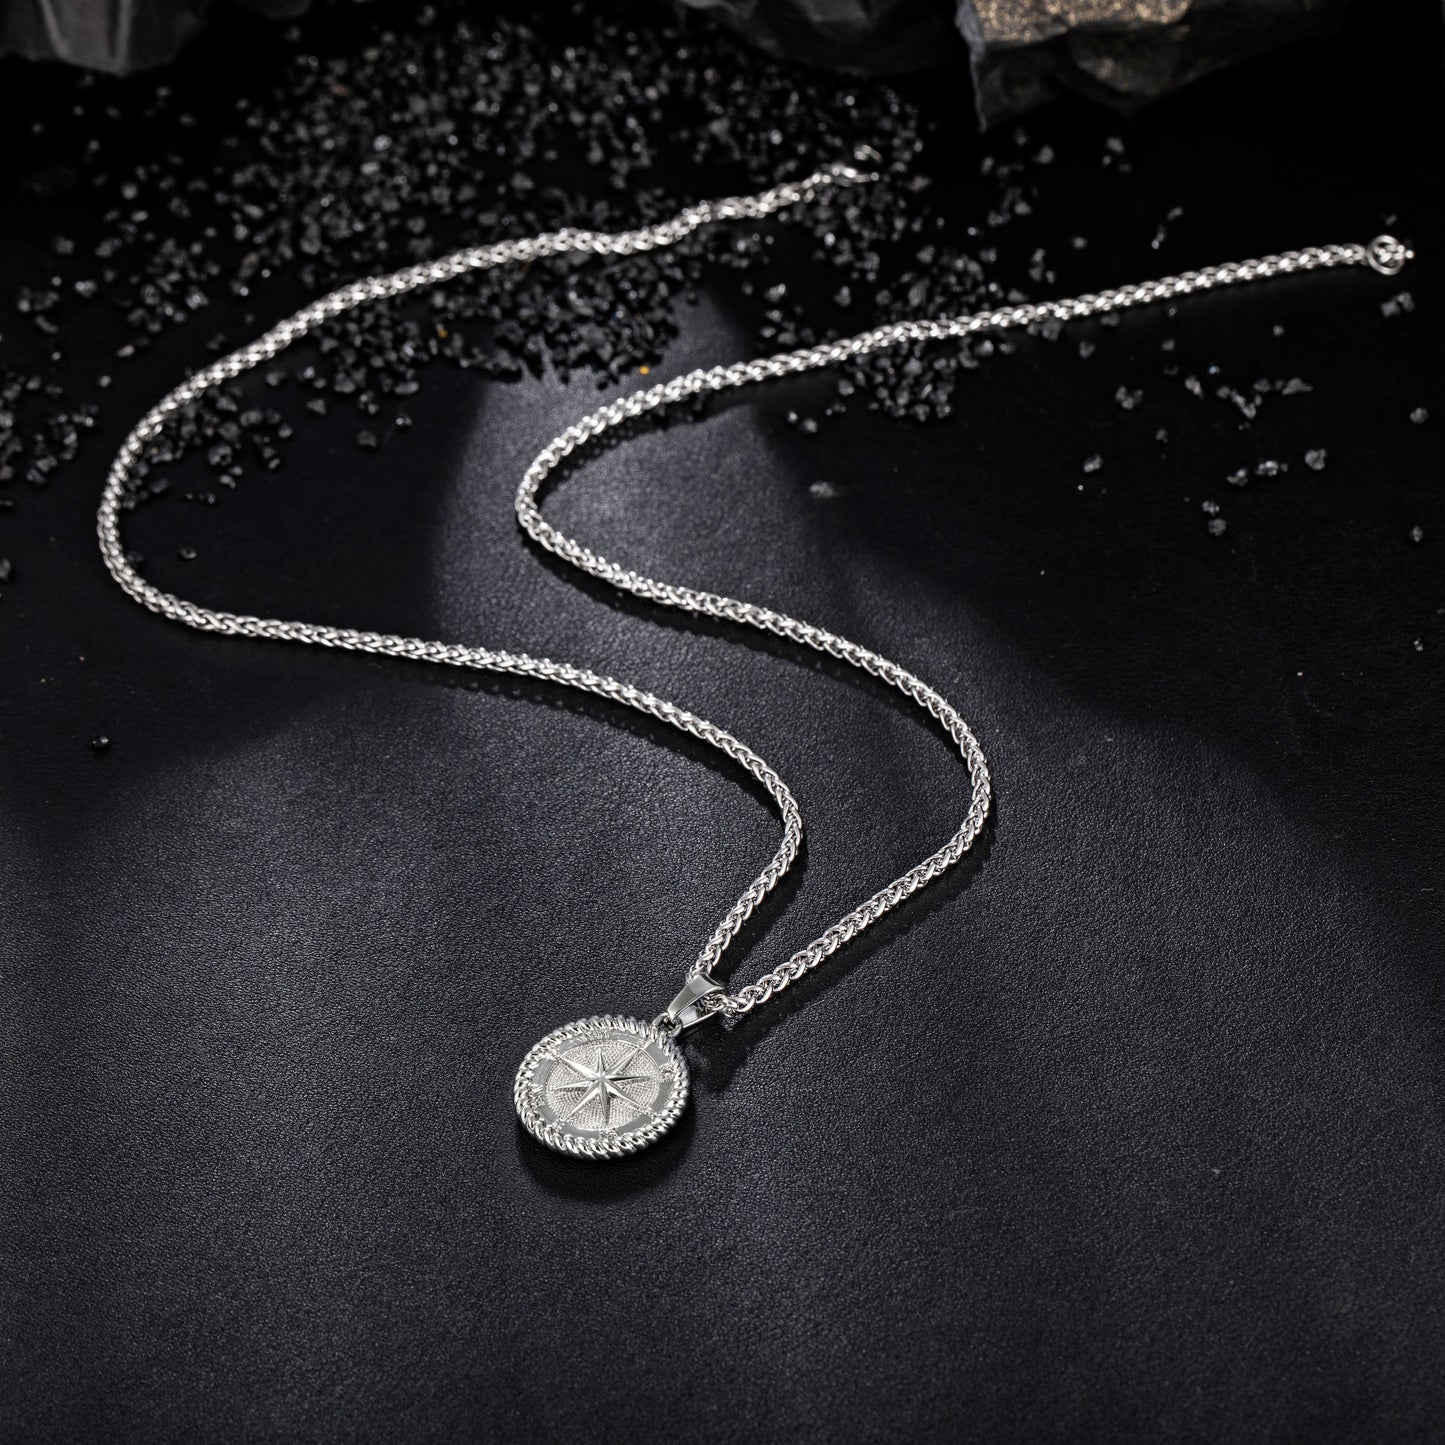 Compass Pendant Necklace Wheat Chain N00373